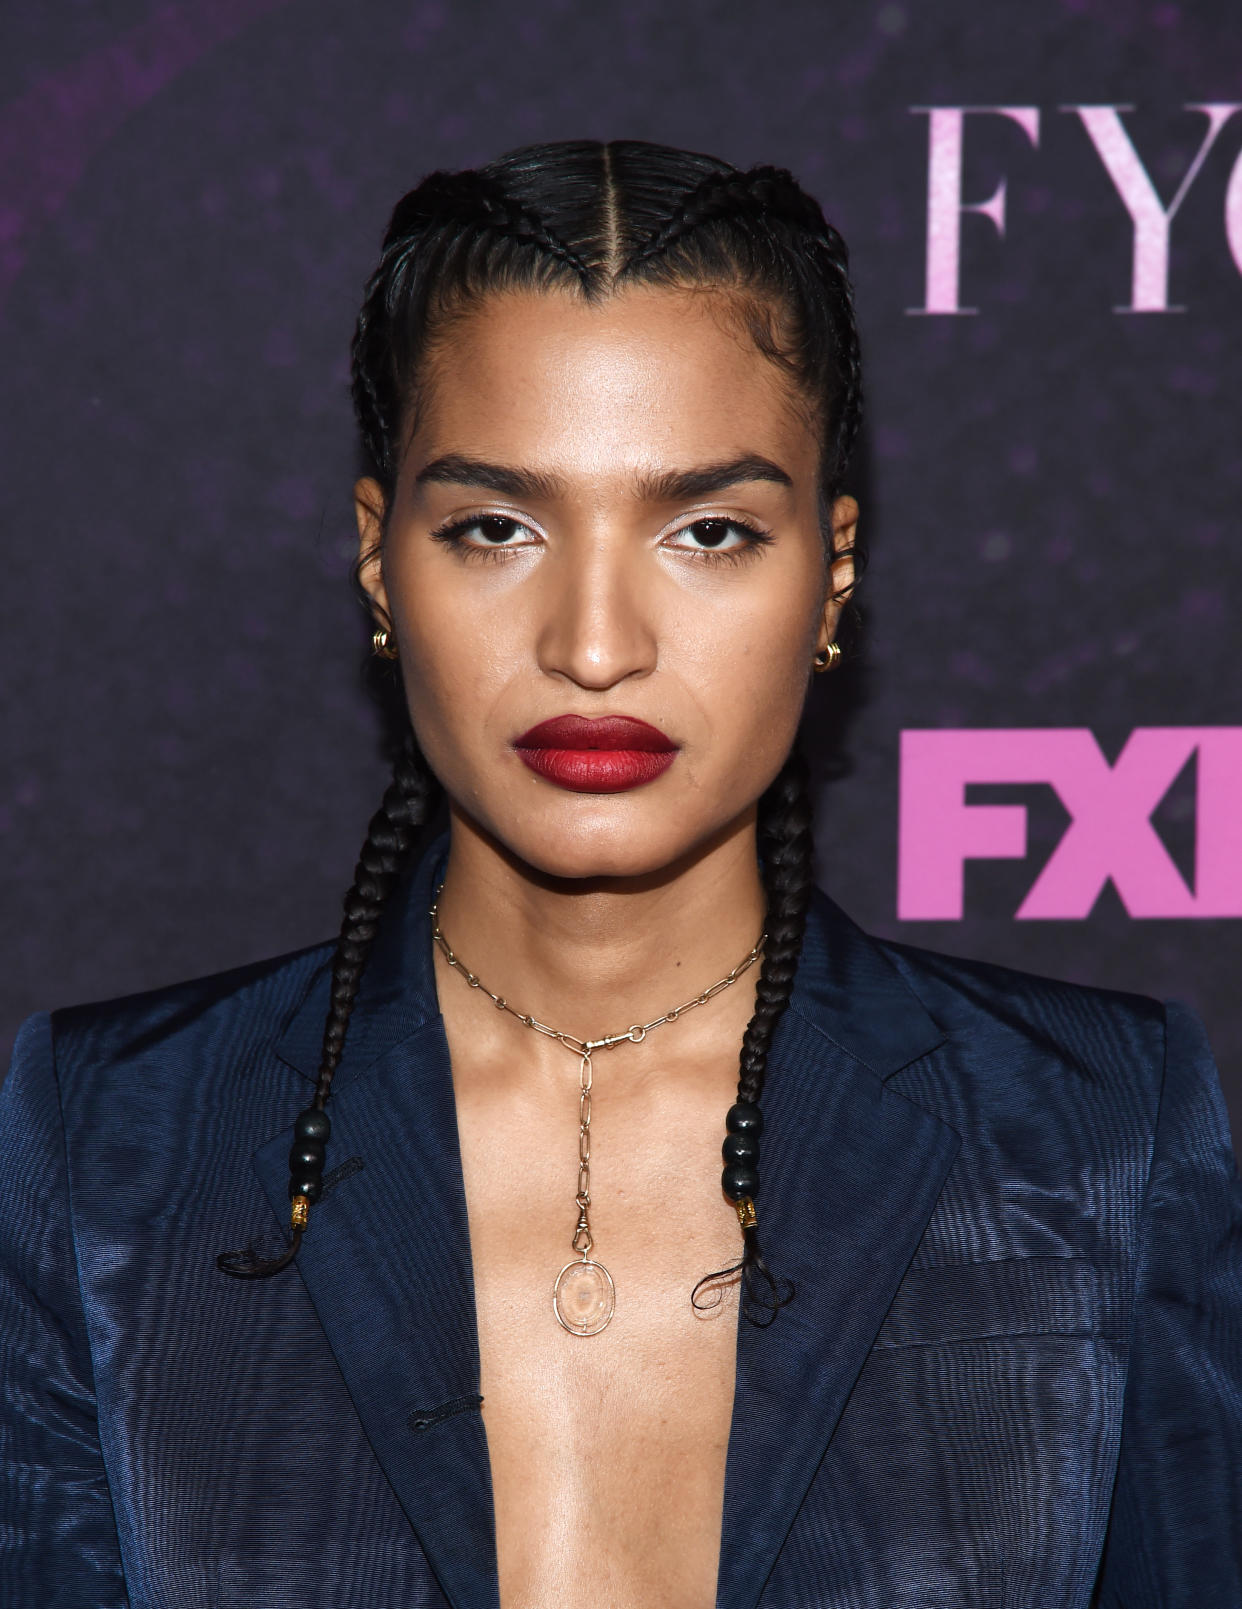 HOLLYWOOD, CALIFORNIA - JUNE 01: Indya Moore attends the FYC Event for FX'x "Pose" at the Hollywood Athletic Club on June 01, 2019 in Hollywood, California. (Photo by Amanda Edwards/Getty Images)